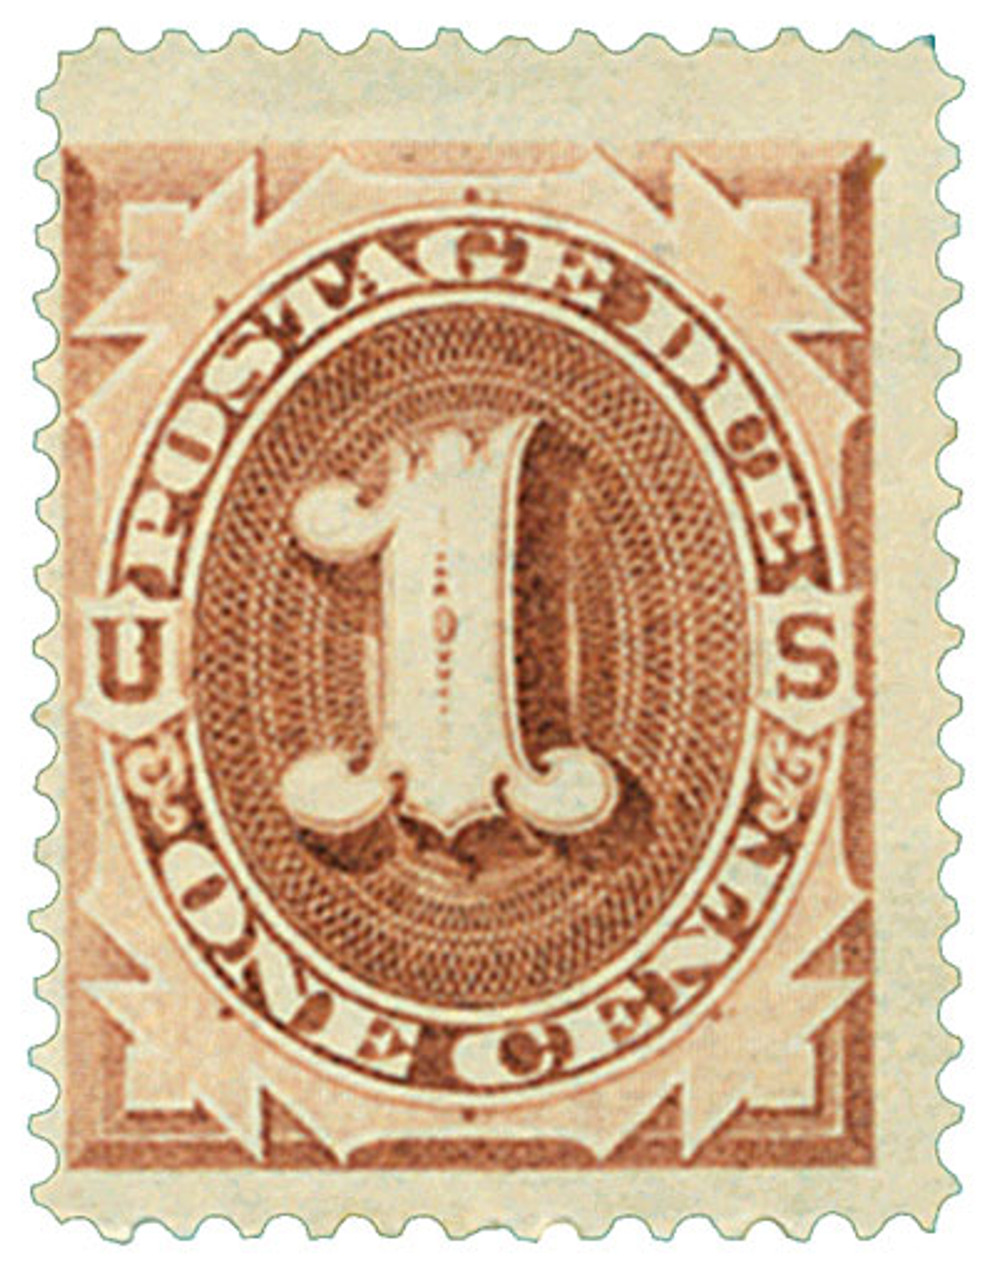 J1 - 1879 1c Postage Due Stamp - First US postage due stamp